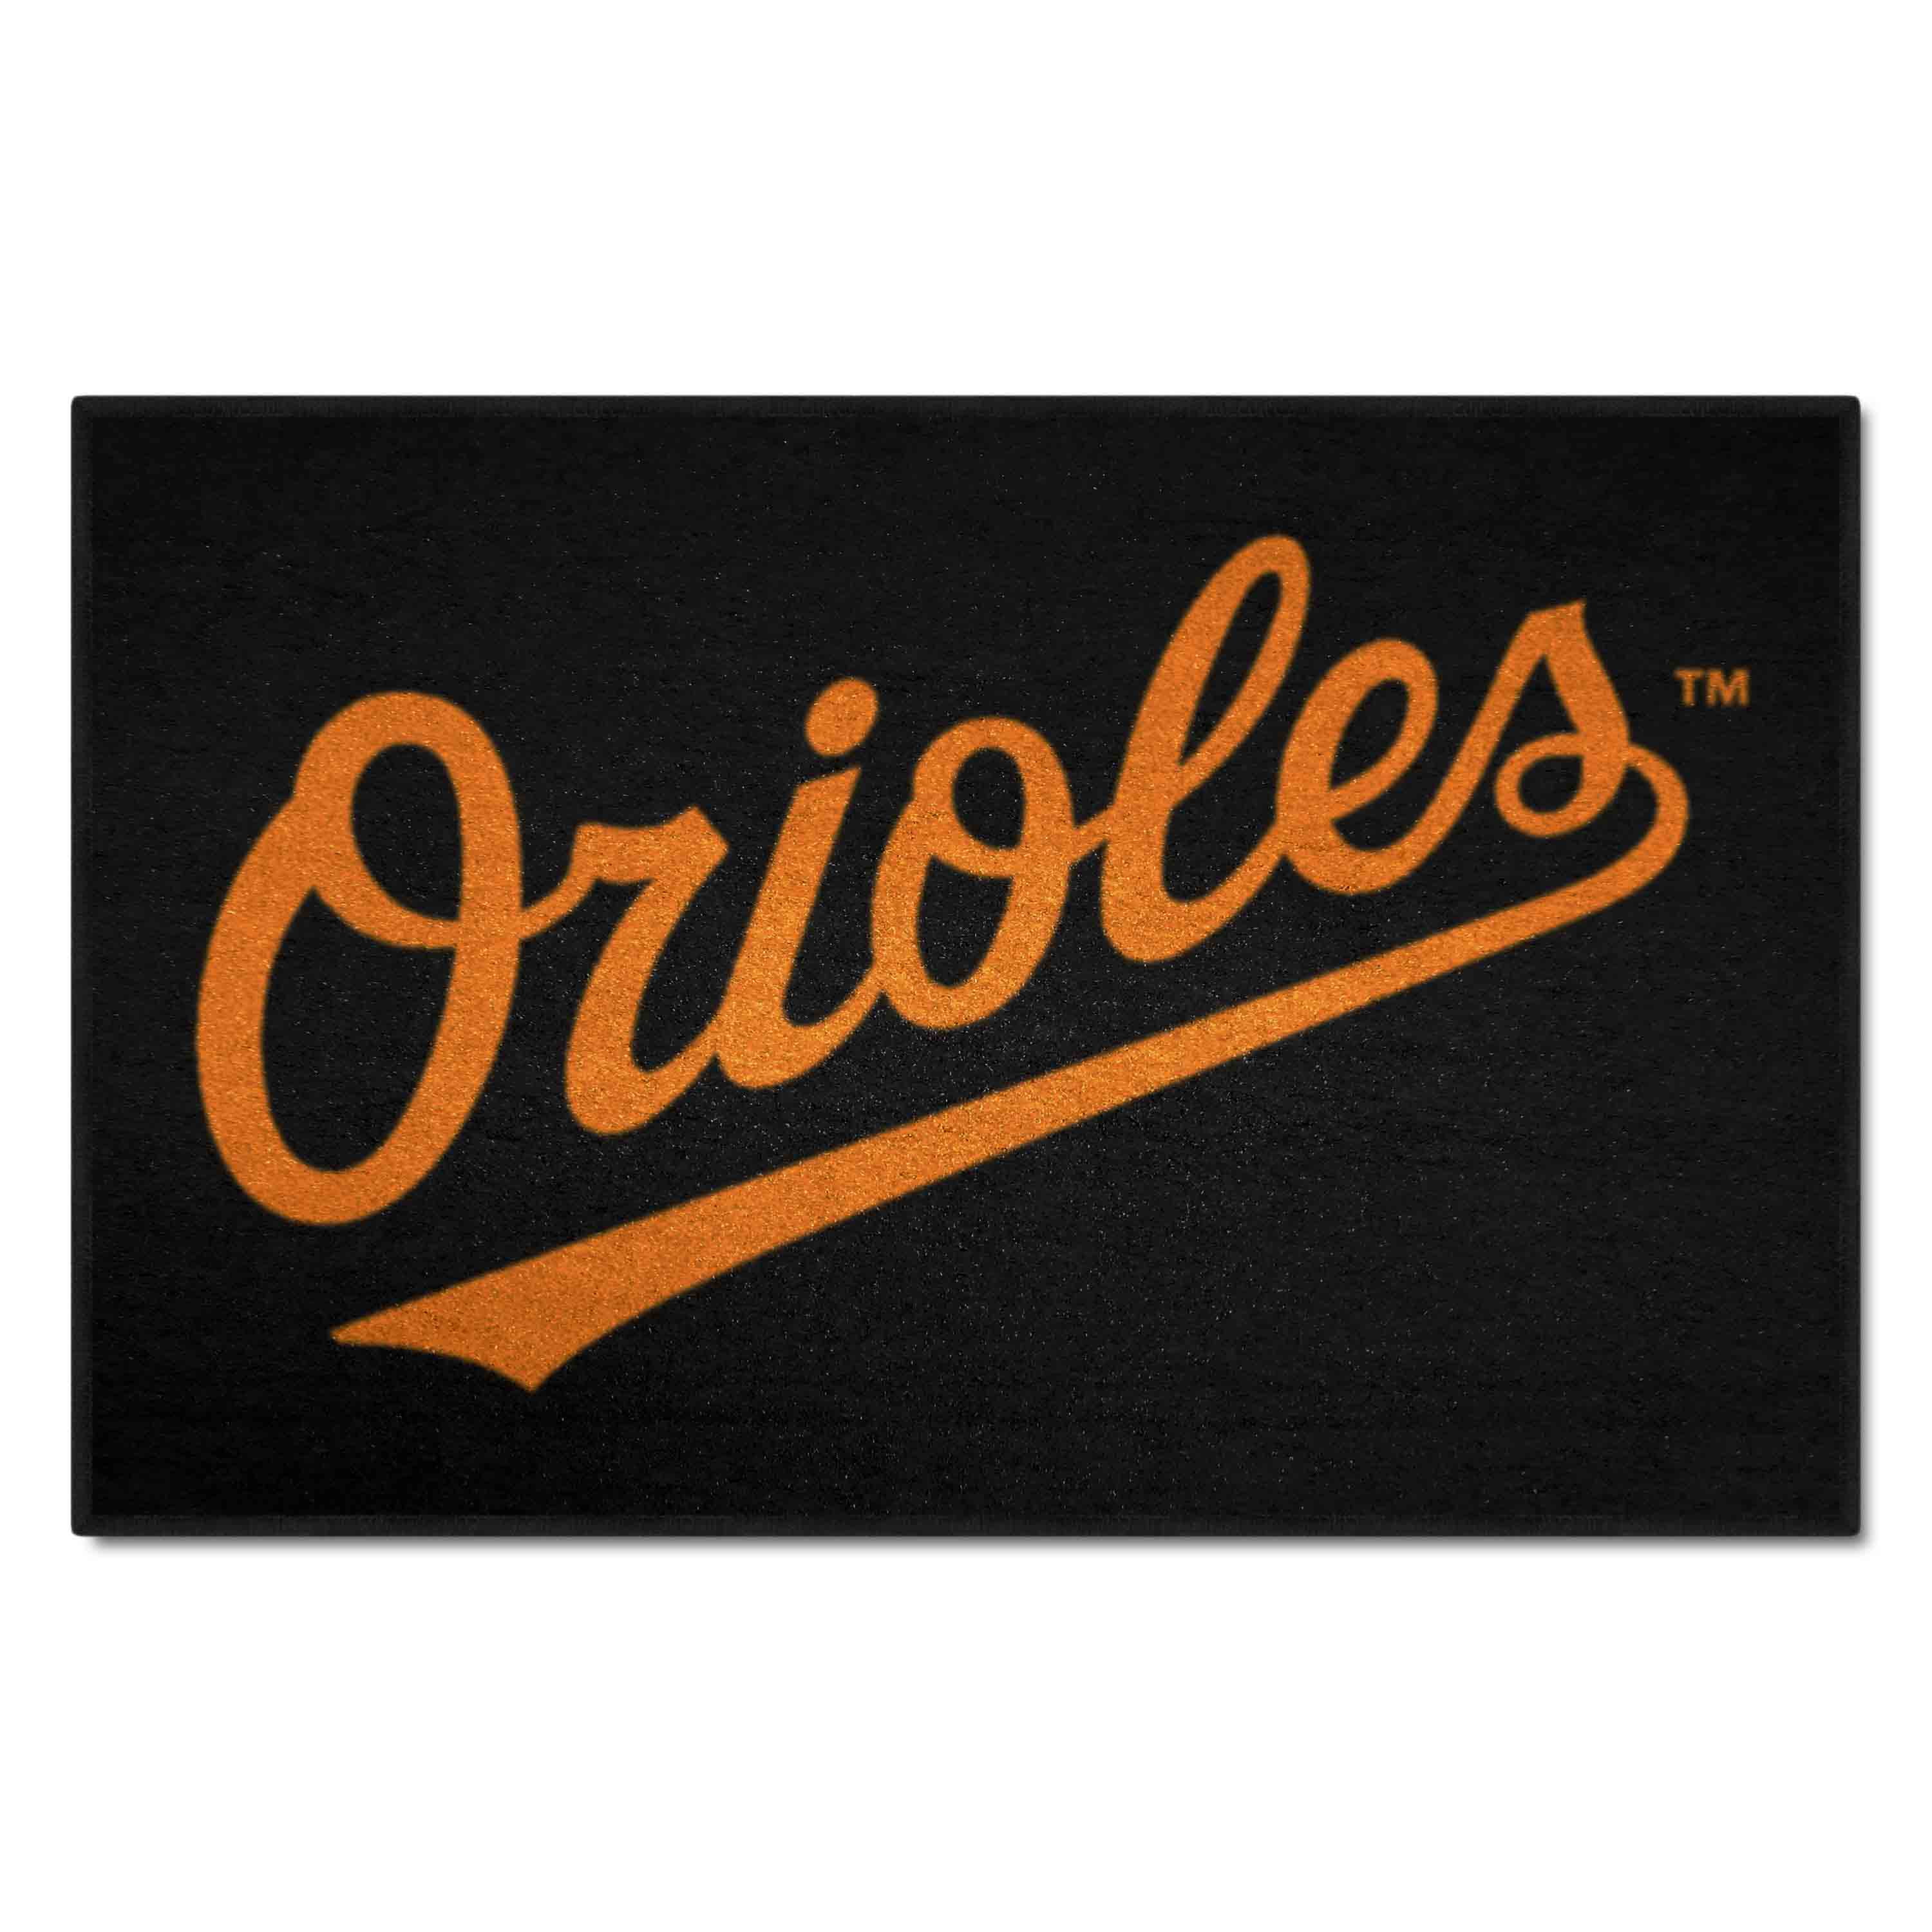 MLB Round Distressed Sign Baltimore Orioles